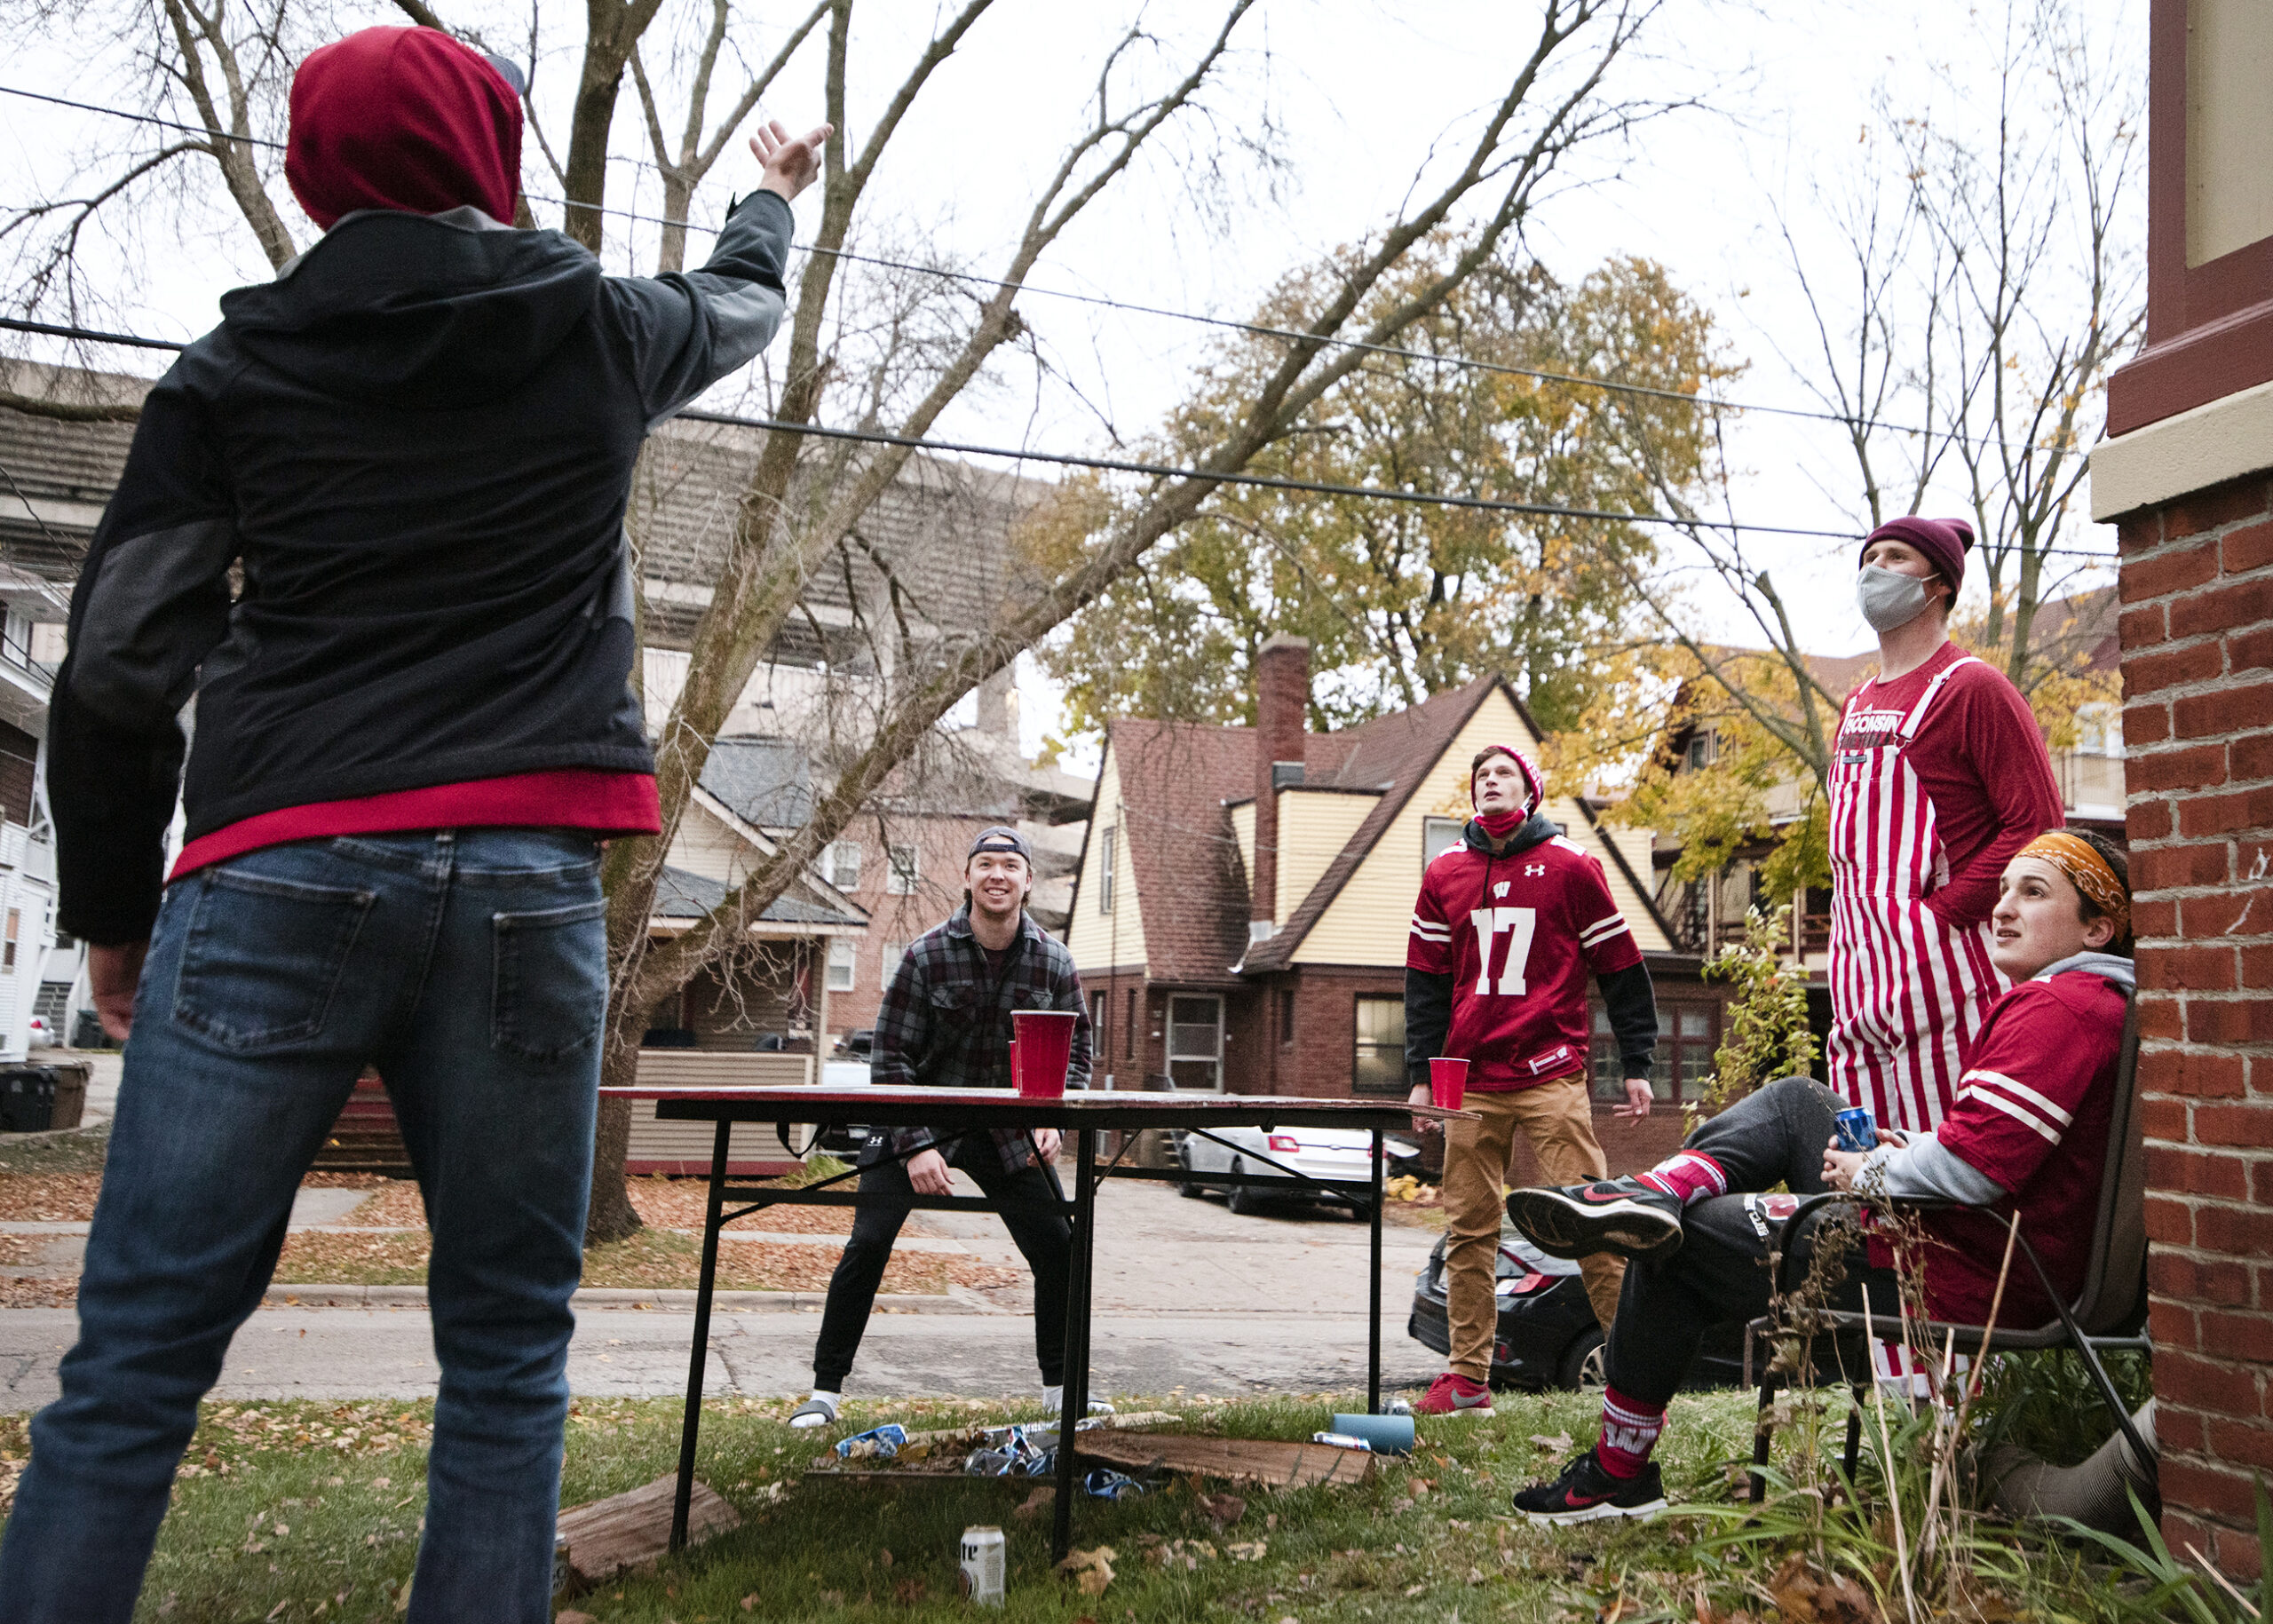 five students play a drinking game in a yard while wearing badgers gear